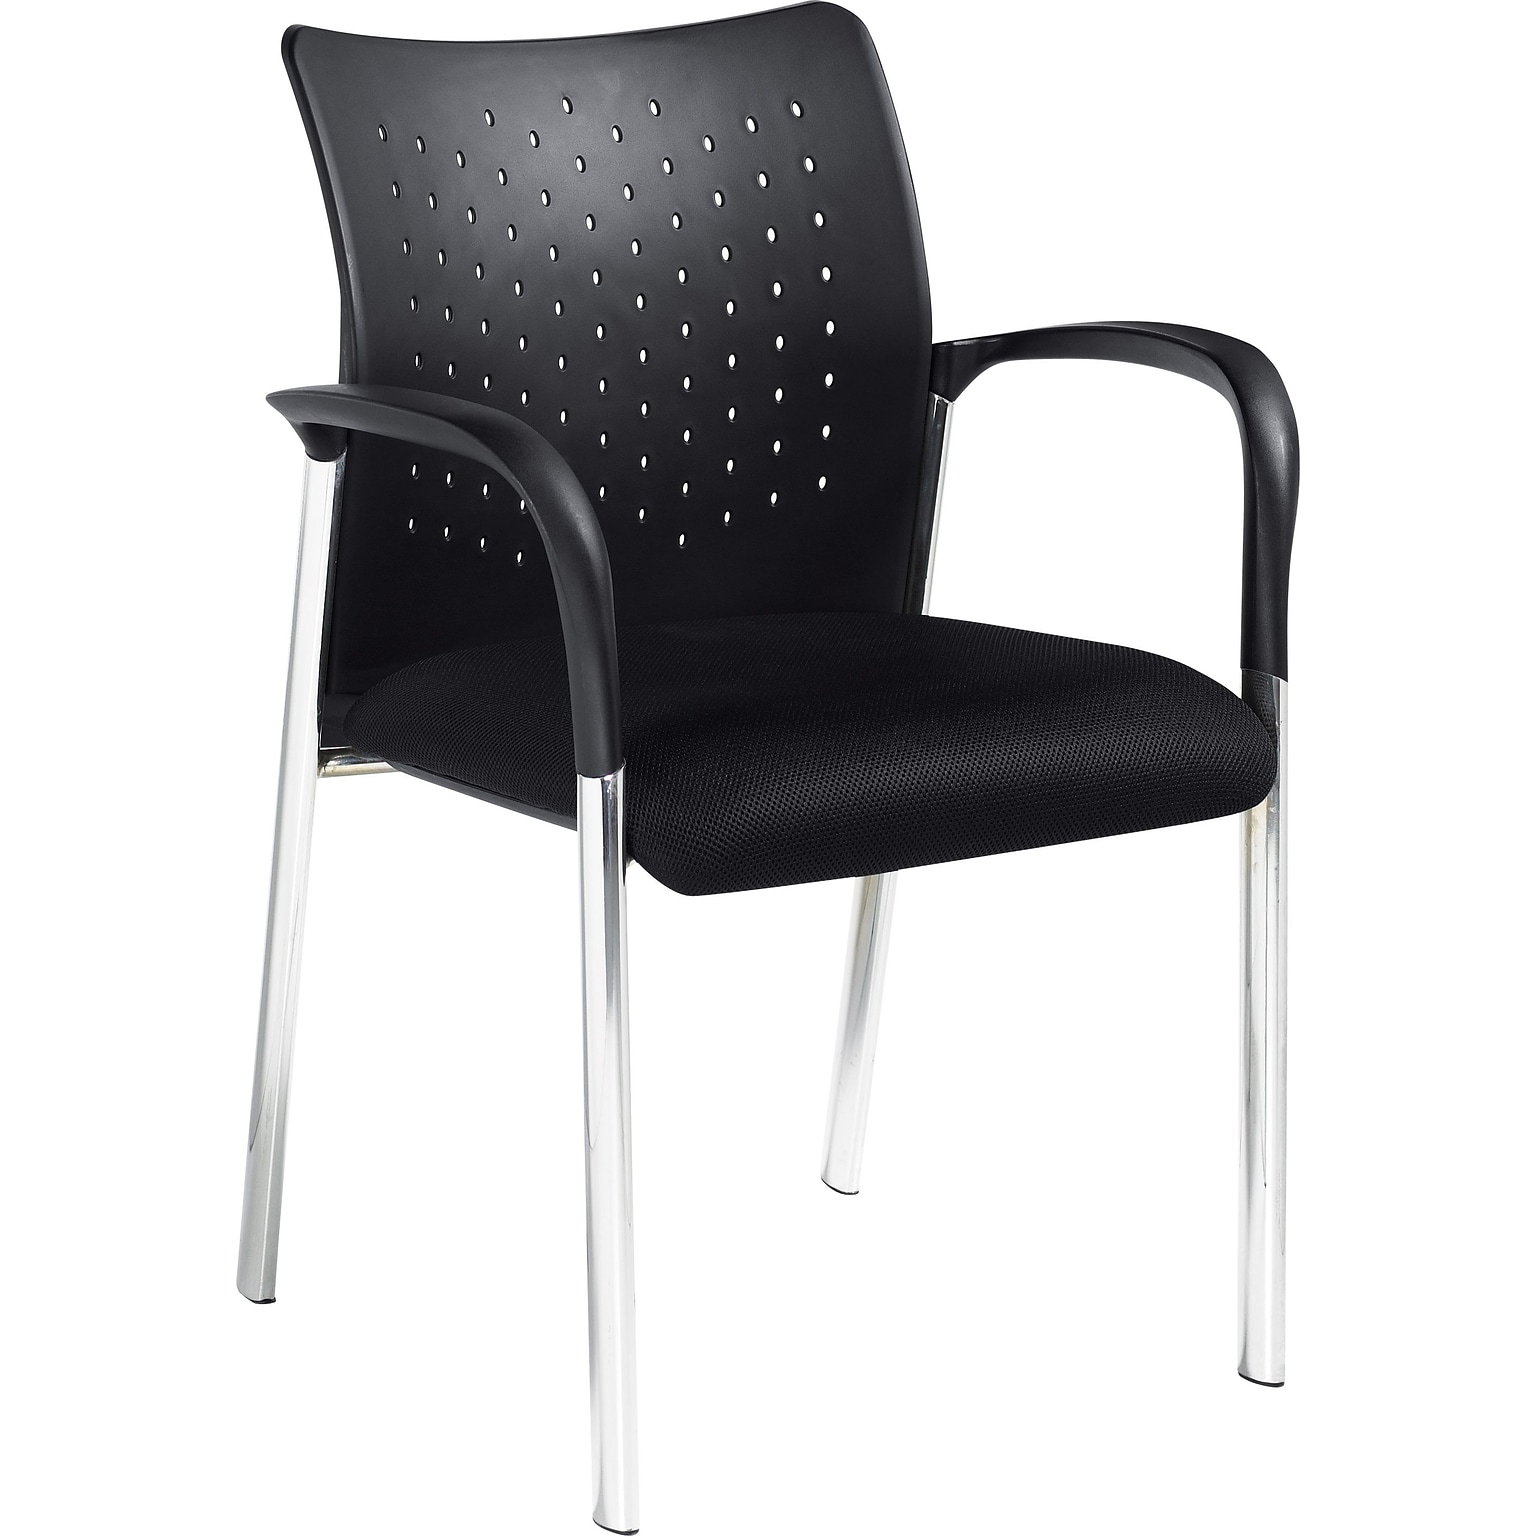 Global Offices To Go Fabric Guest Chair, Black, 2/Carton (TDOTG11740B)